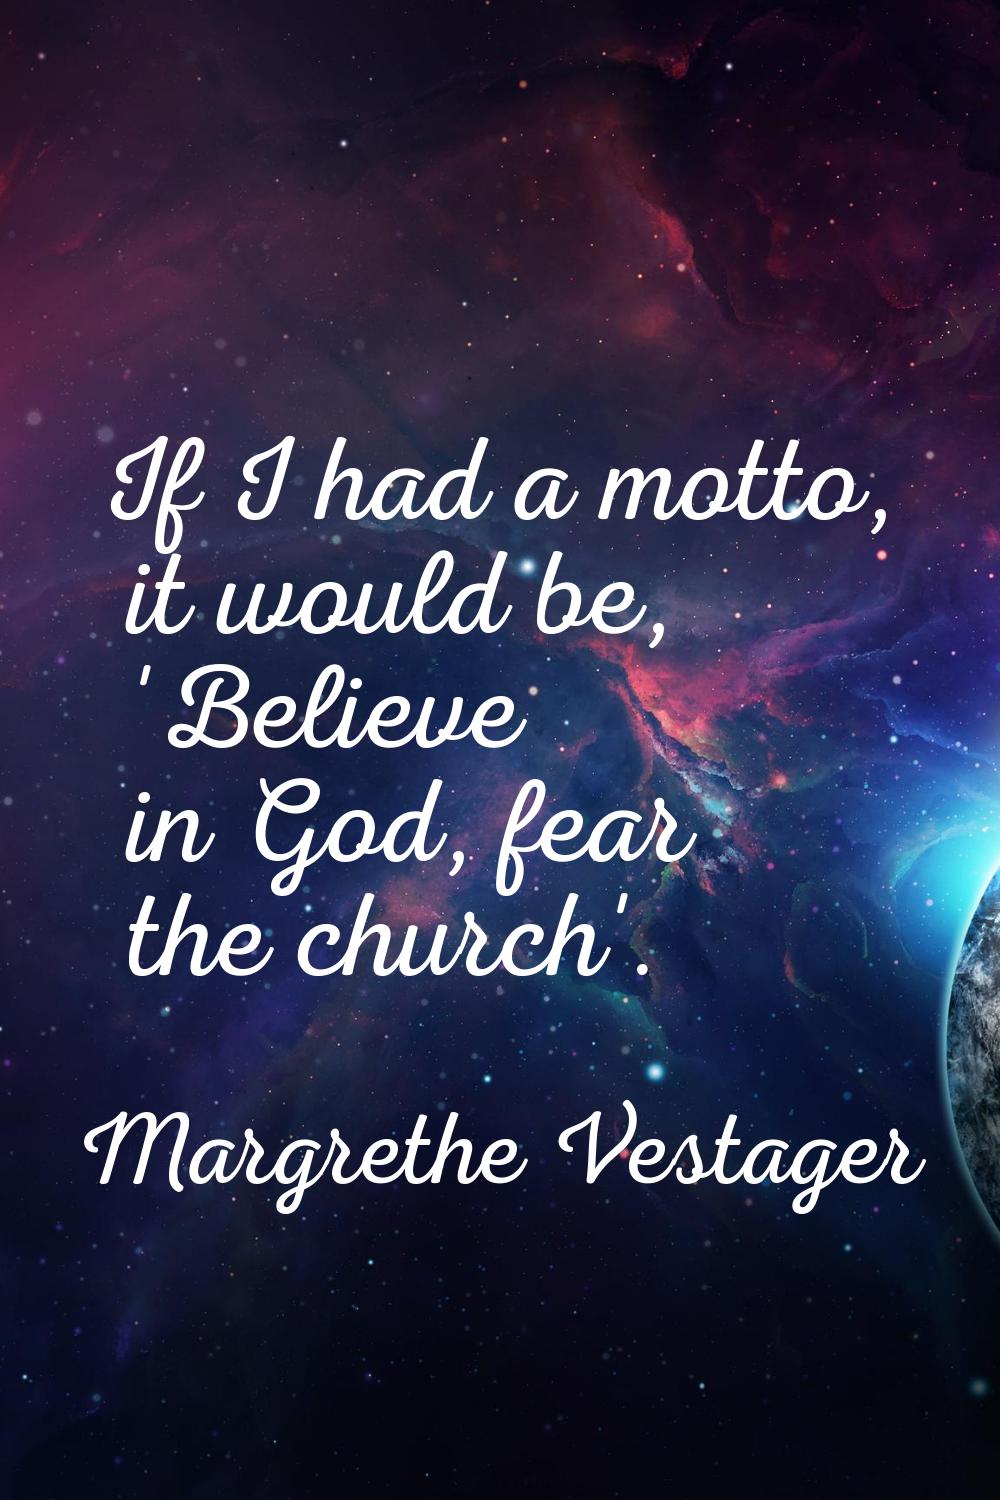 If I had a motto, it would be, 'Believe in God, fear the church'.